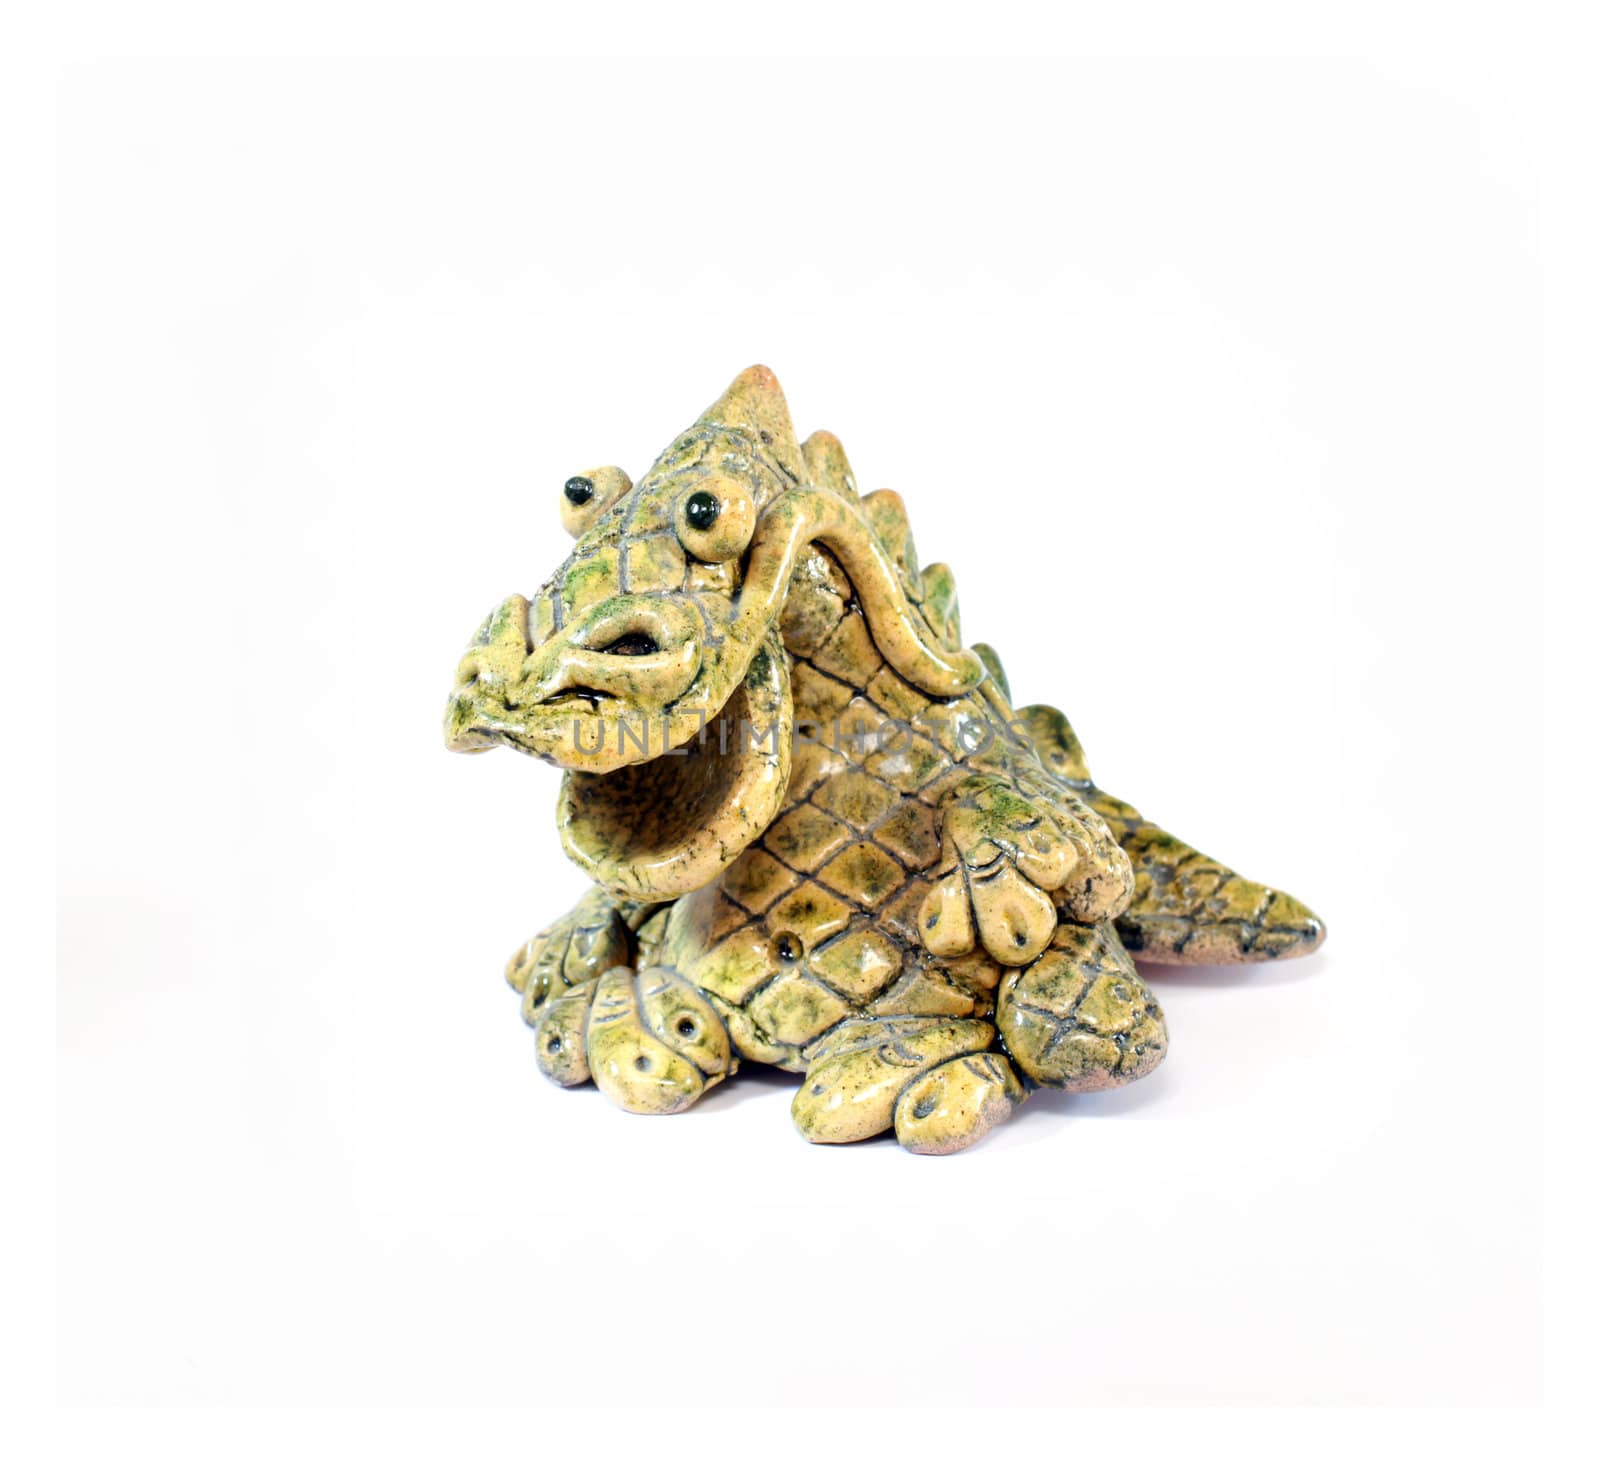 ceramic figurine of smiling yellow and green dragon - the symbol of 2012 year